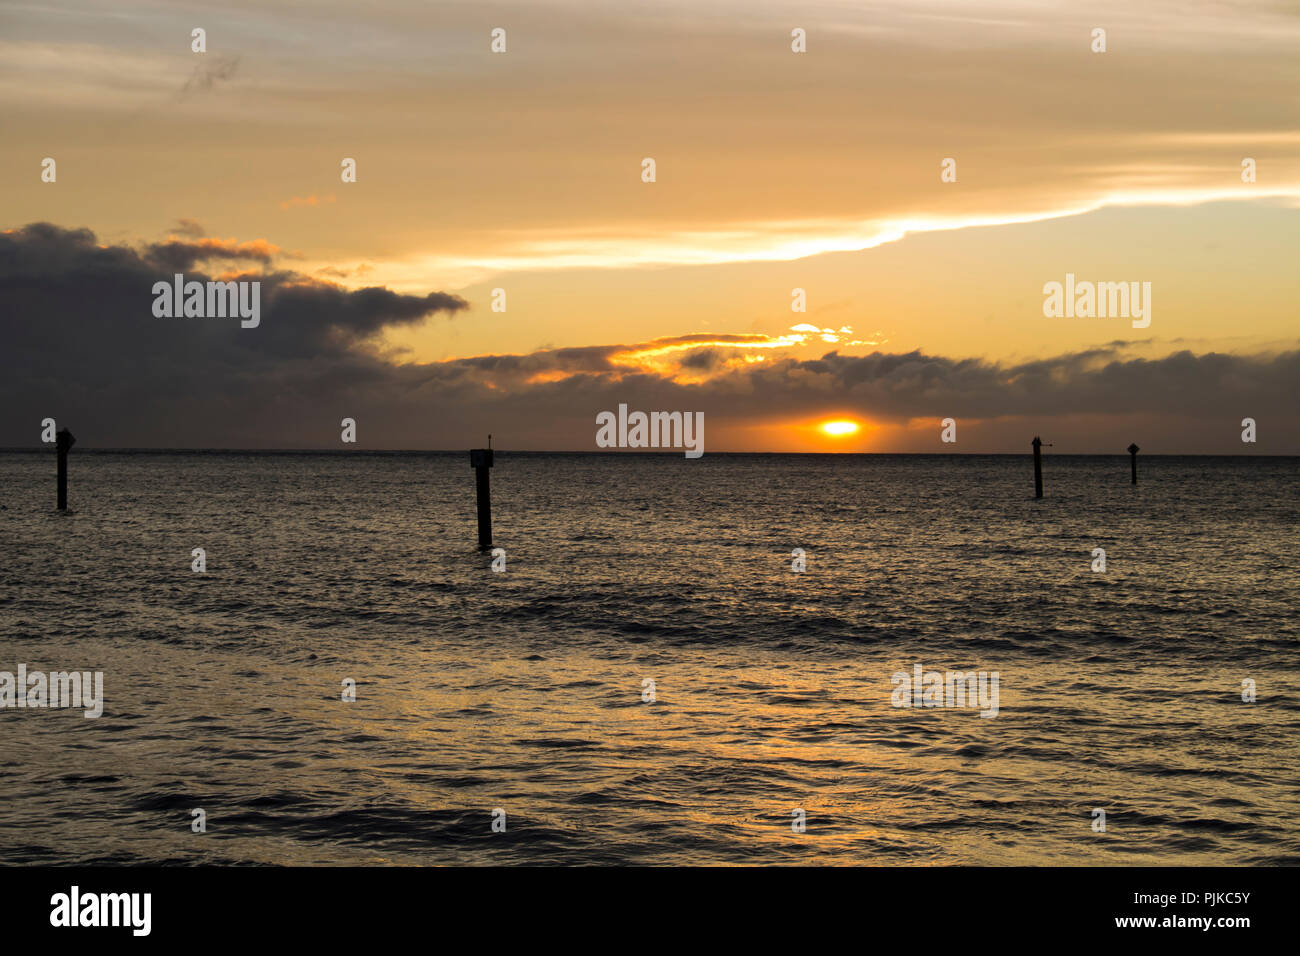 Orange Sunset over Ocean with Pier Pilings Stock Photo